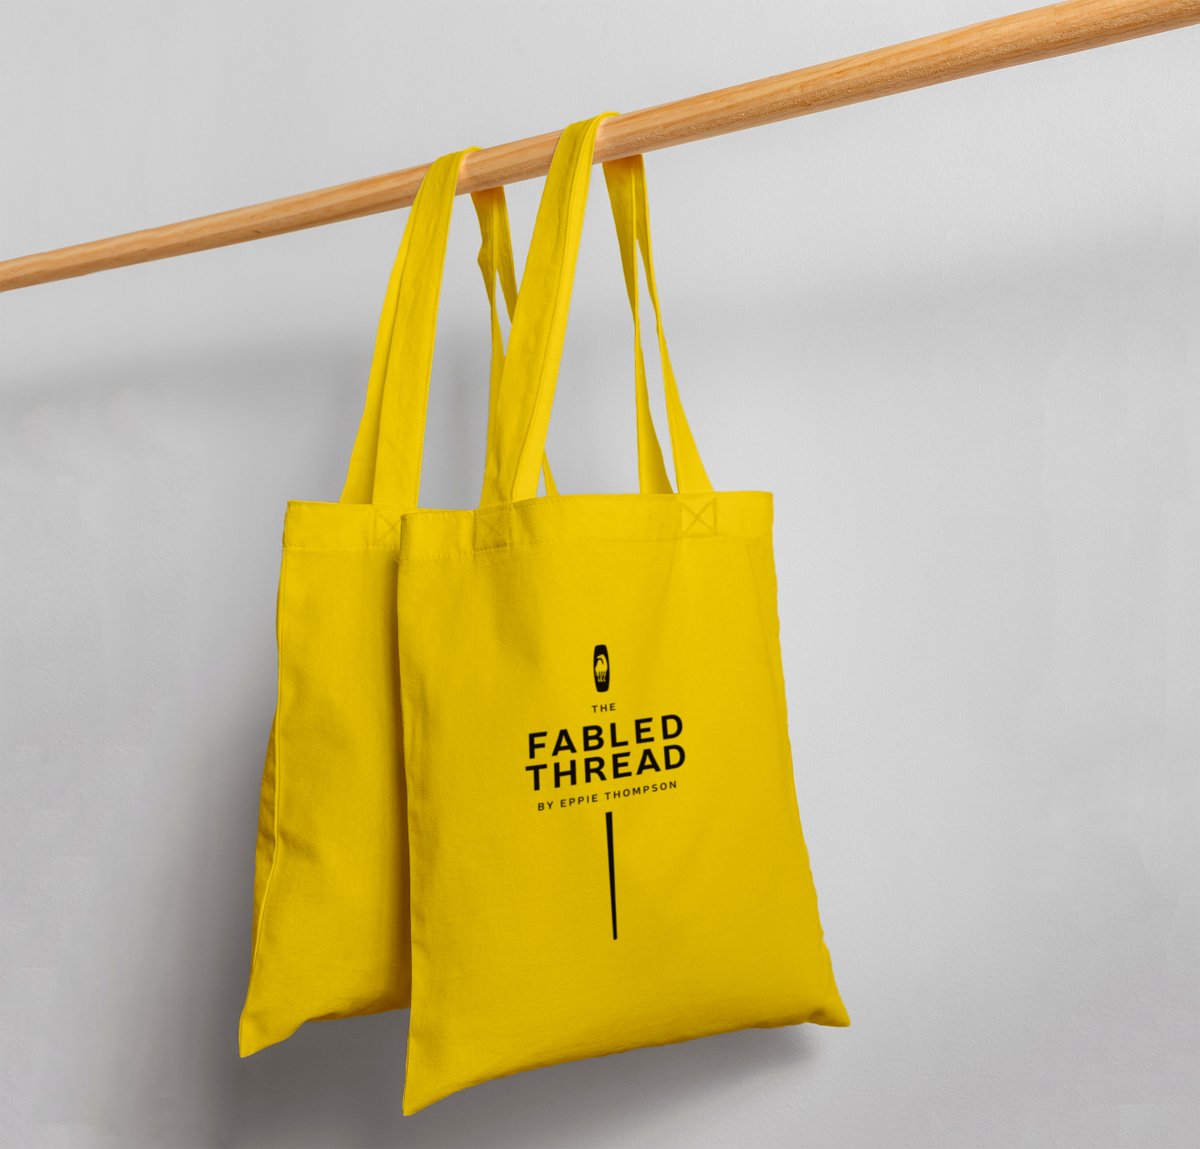 Custom cotton bags  in either plain cotton or in a range of vibrant colours to suit your event, store, and advertising goals. We can also offer you bags in a range of different sizes.

🌟 Tap the link in the Bio to see more & get your quote 🌟

#CottonBag #Bag #PackagingBag